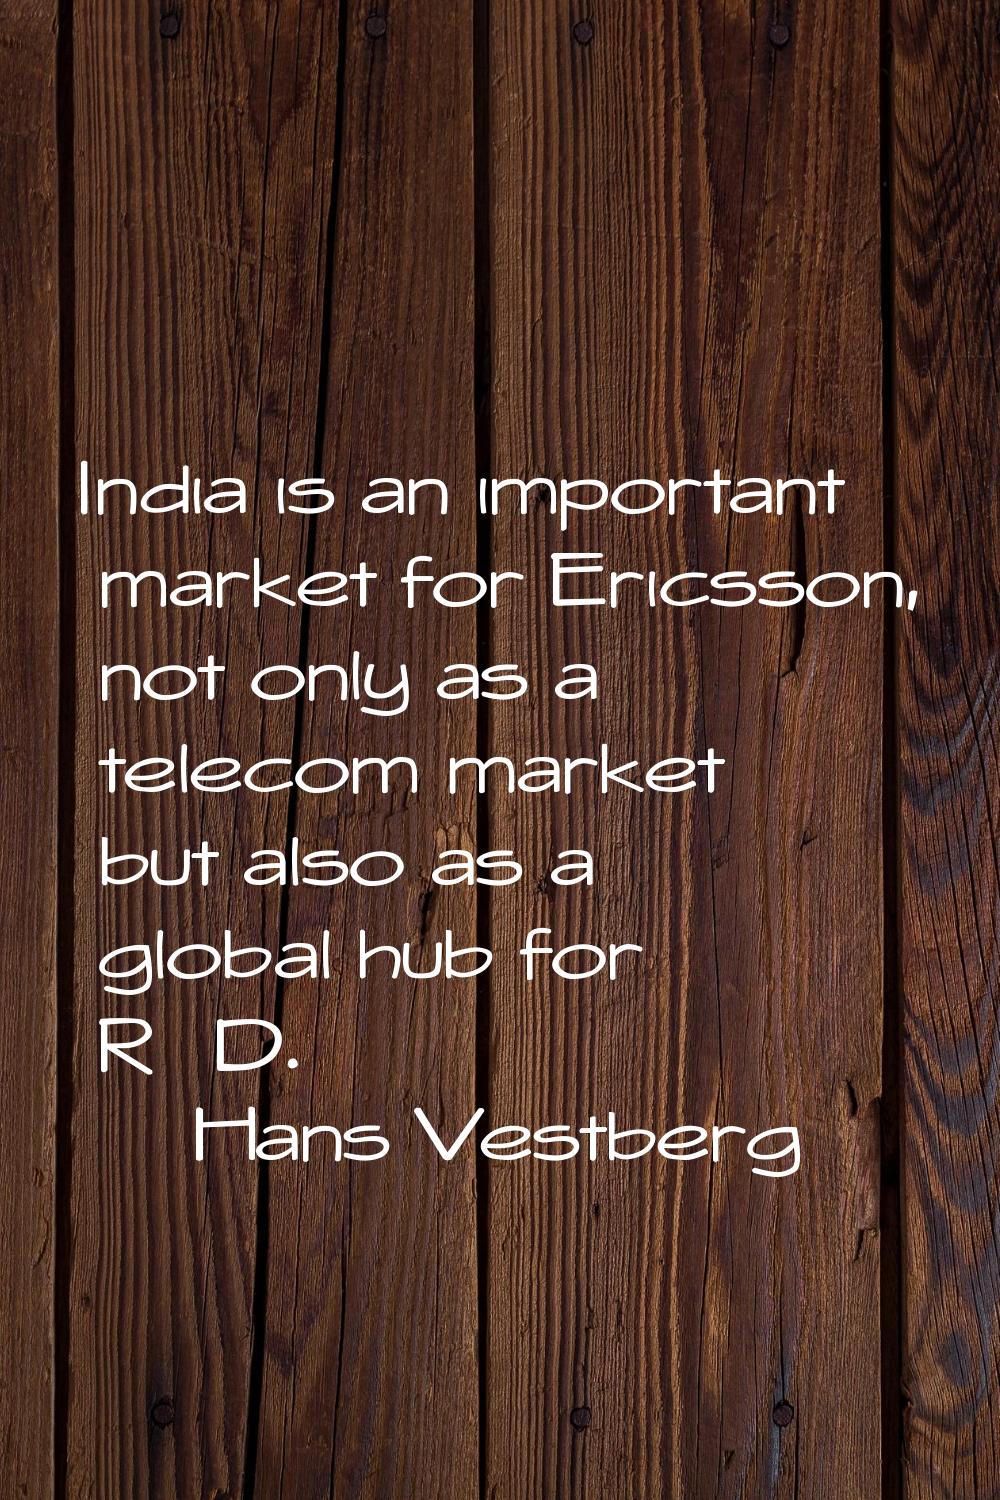 India is an important market for Ericsson, not only as a telecom market but also as a global hub fo